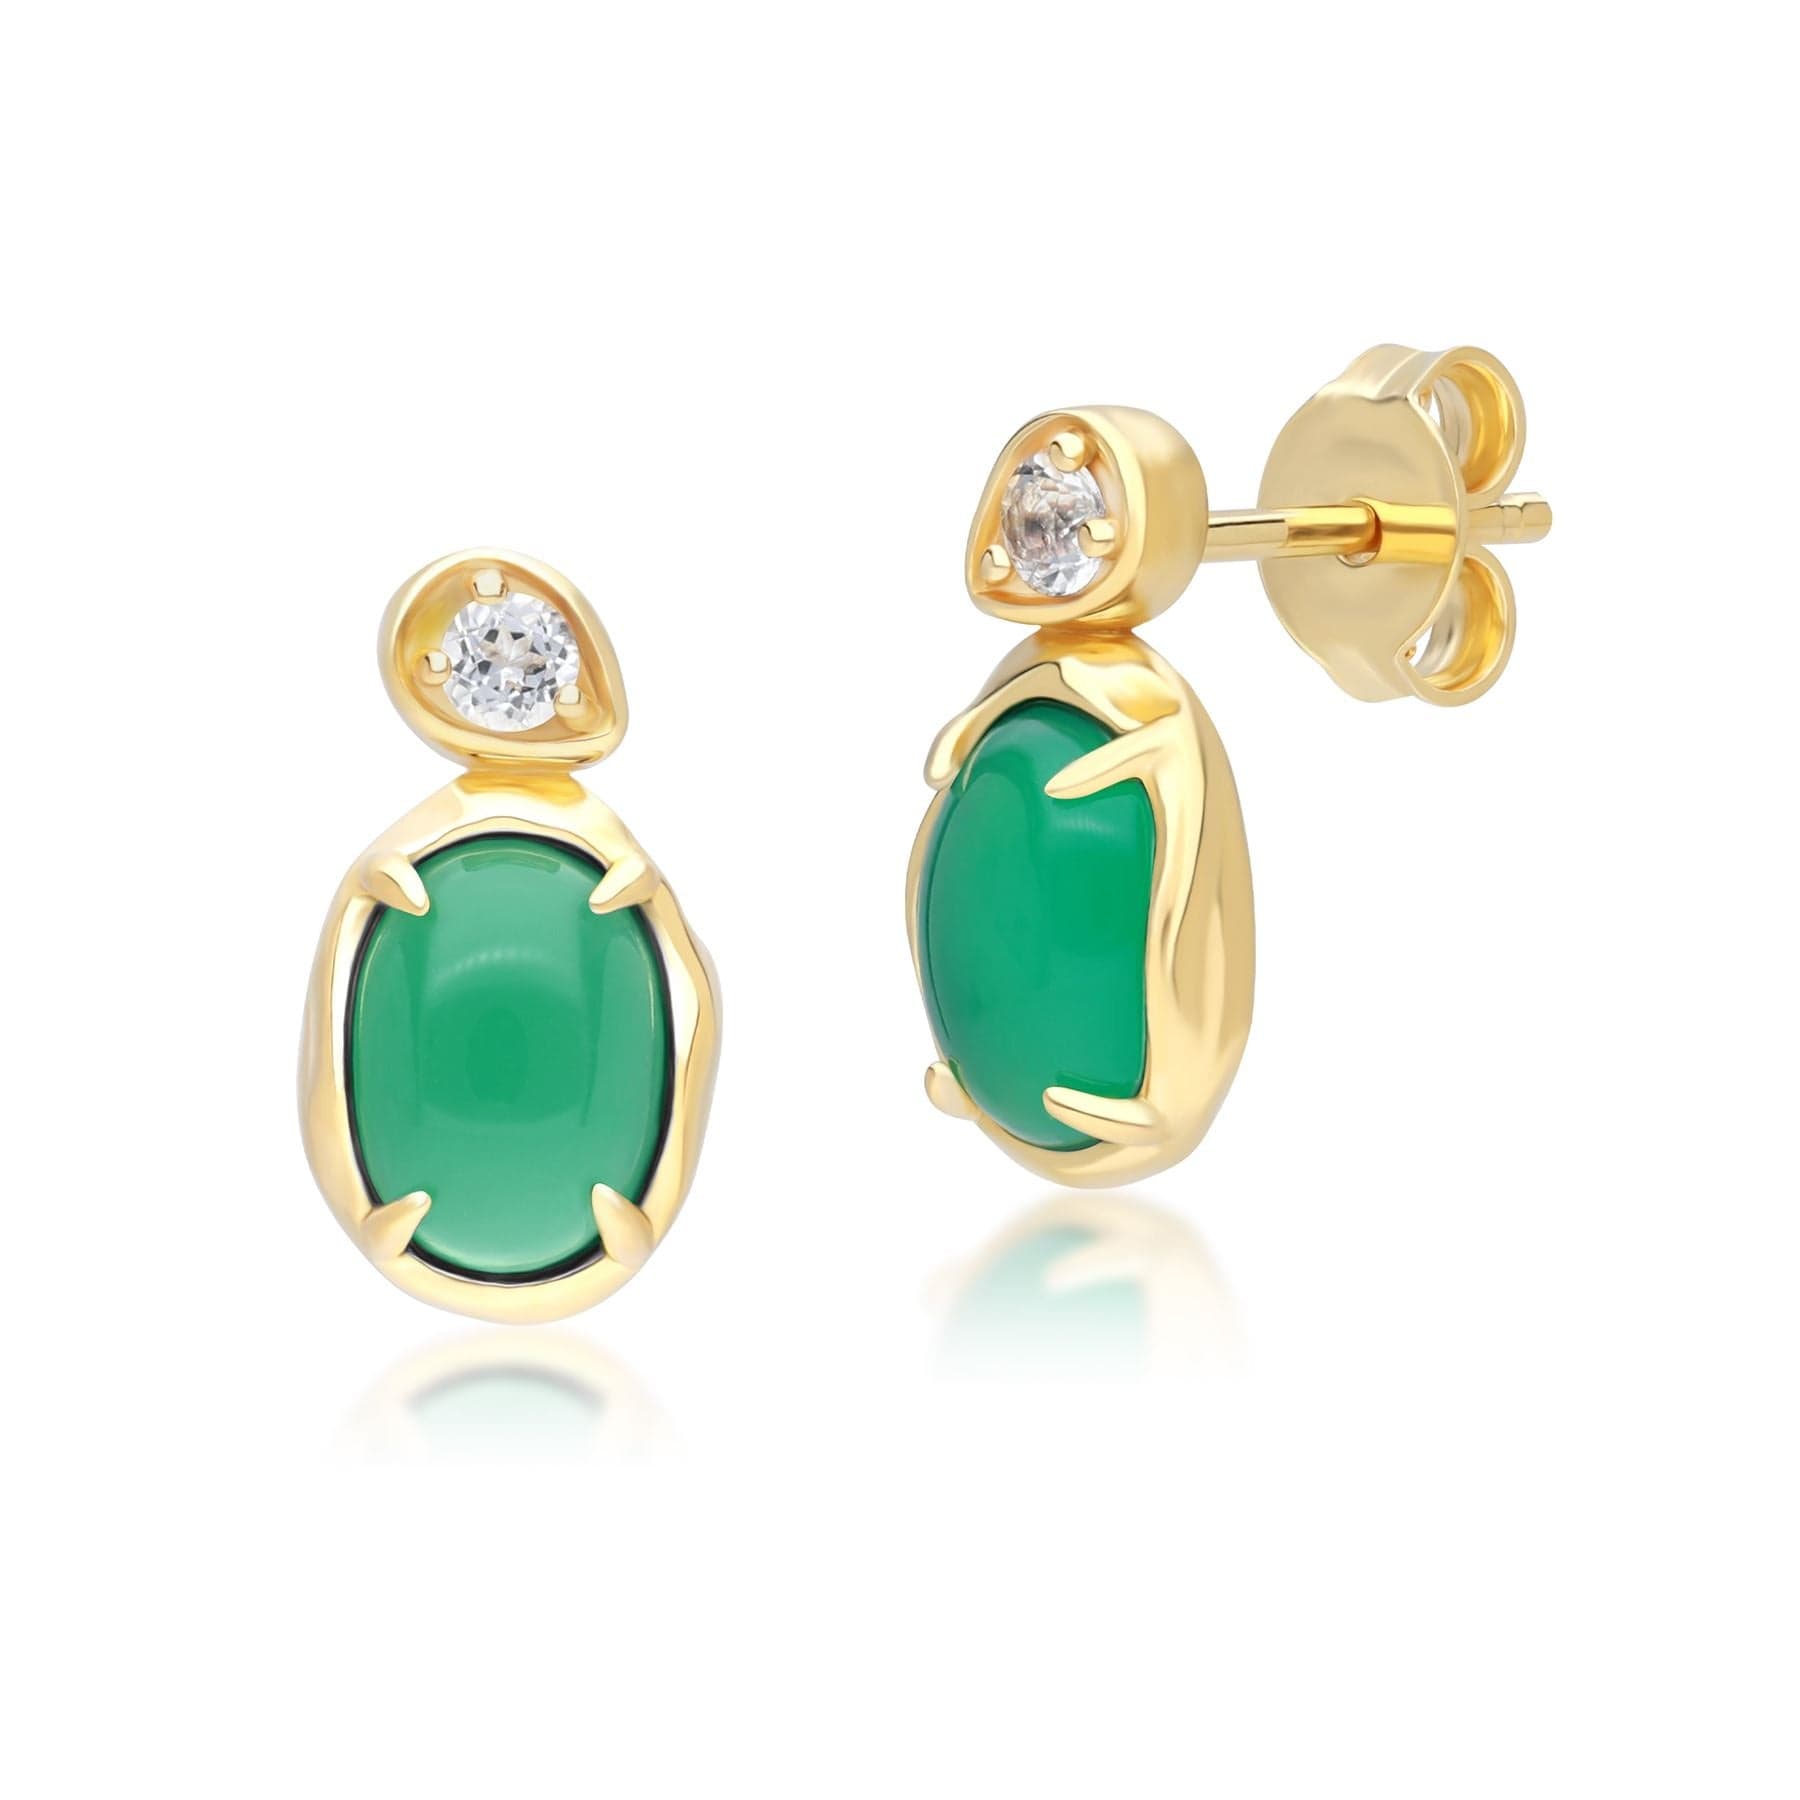 253E418801925 Irregular Oval Dyed Green Chalcedony & Topaz Drop Earrings In 18ct Gold Plated SterlIng Silver Front